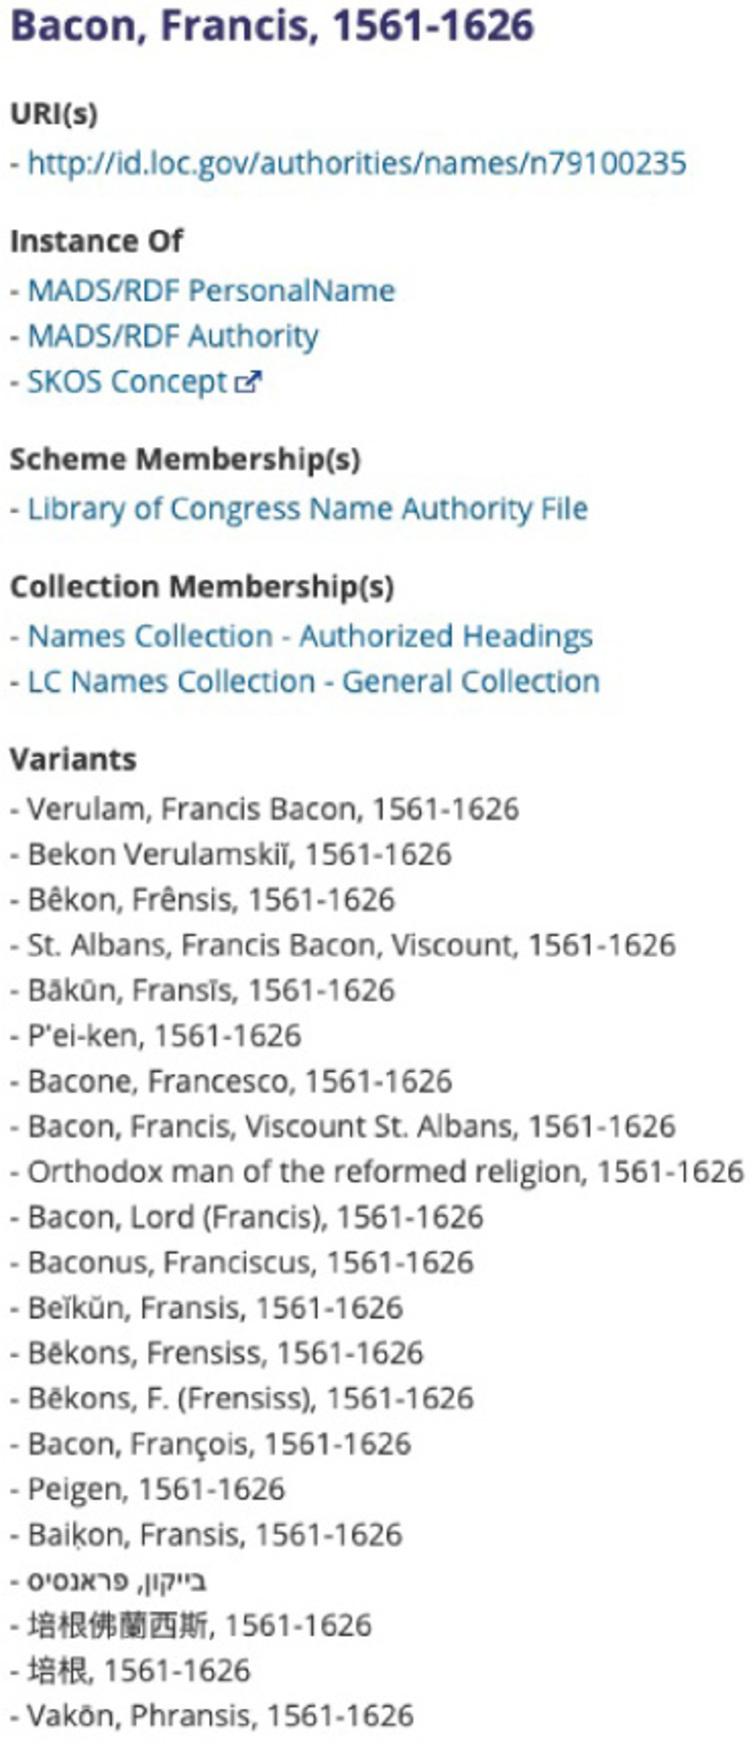 Francis Bacon’s Library of Congress Name Authority record, complete with links to authoritative forms of his name in other schemas.